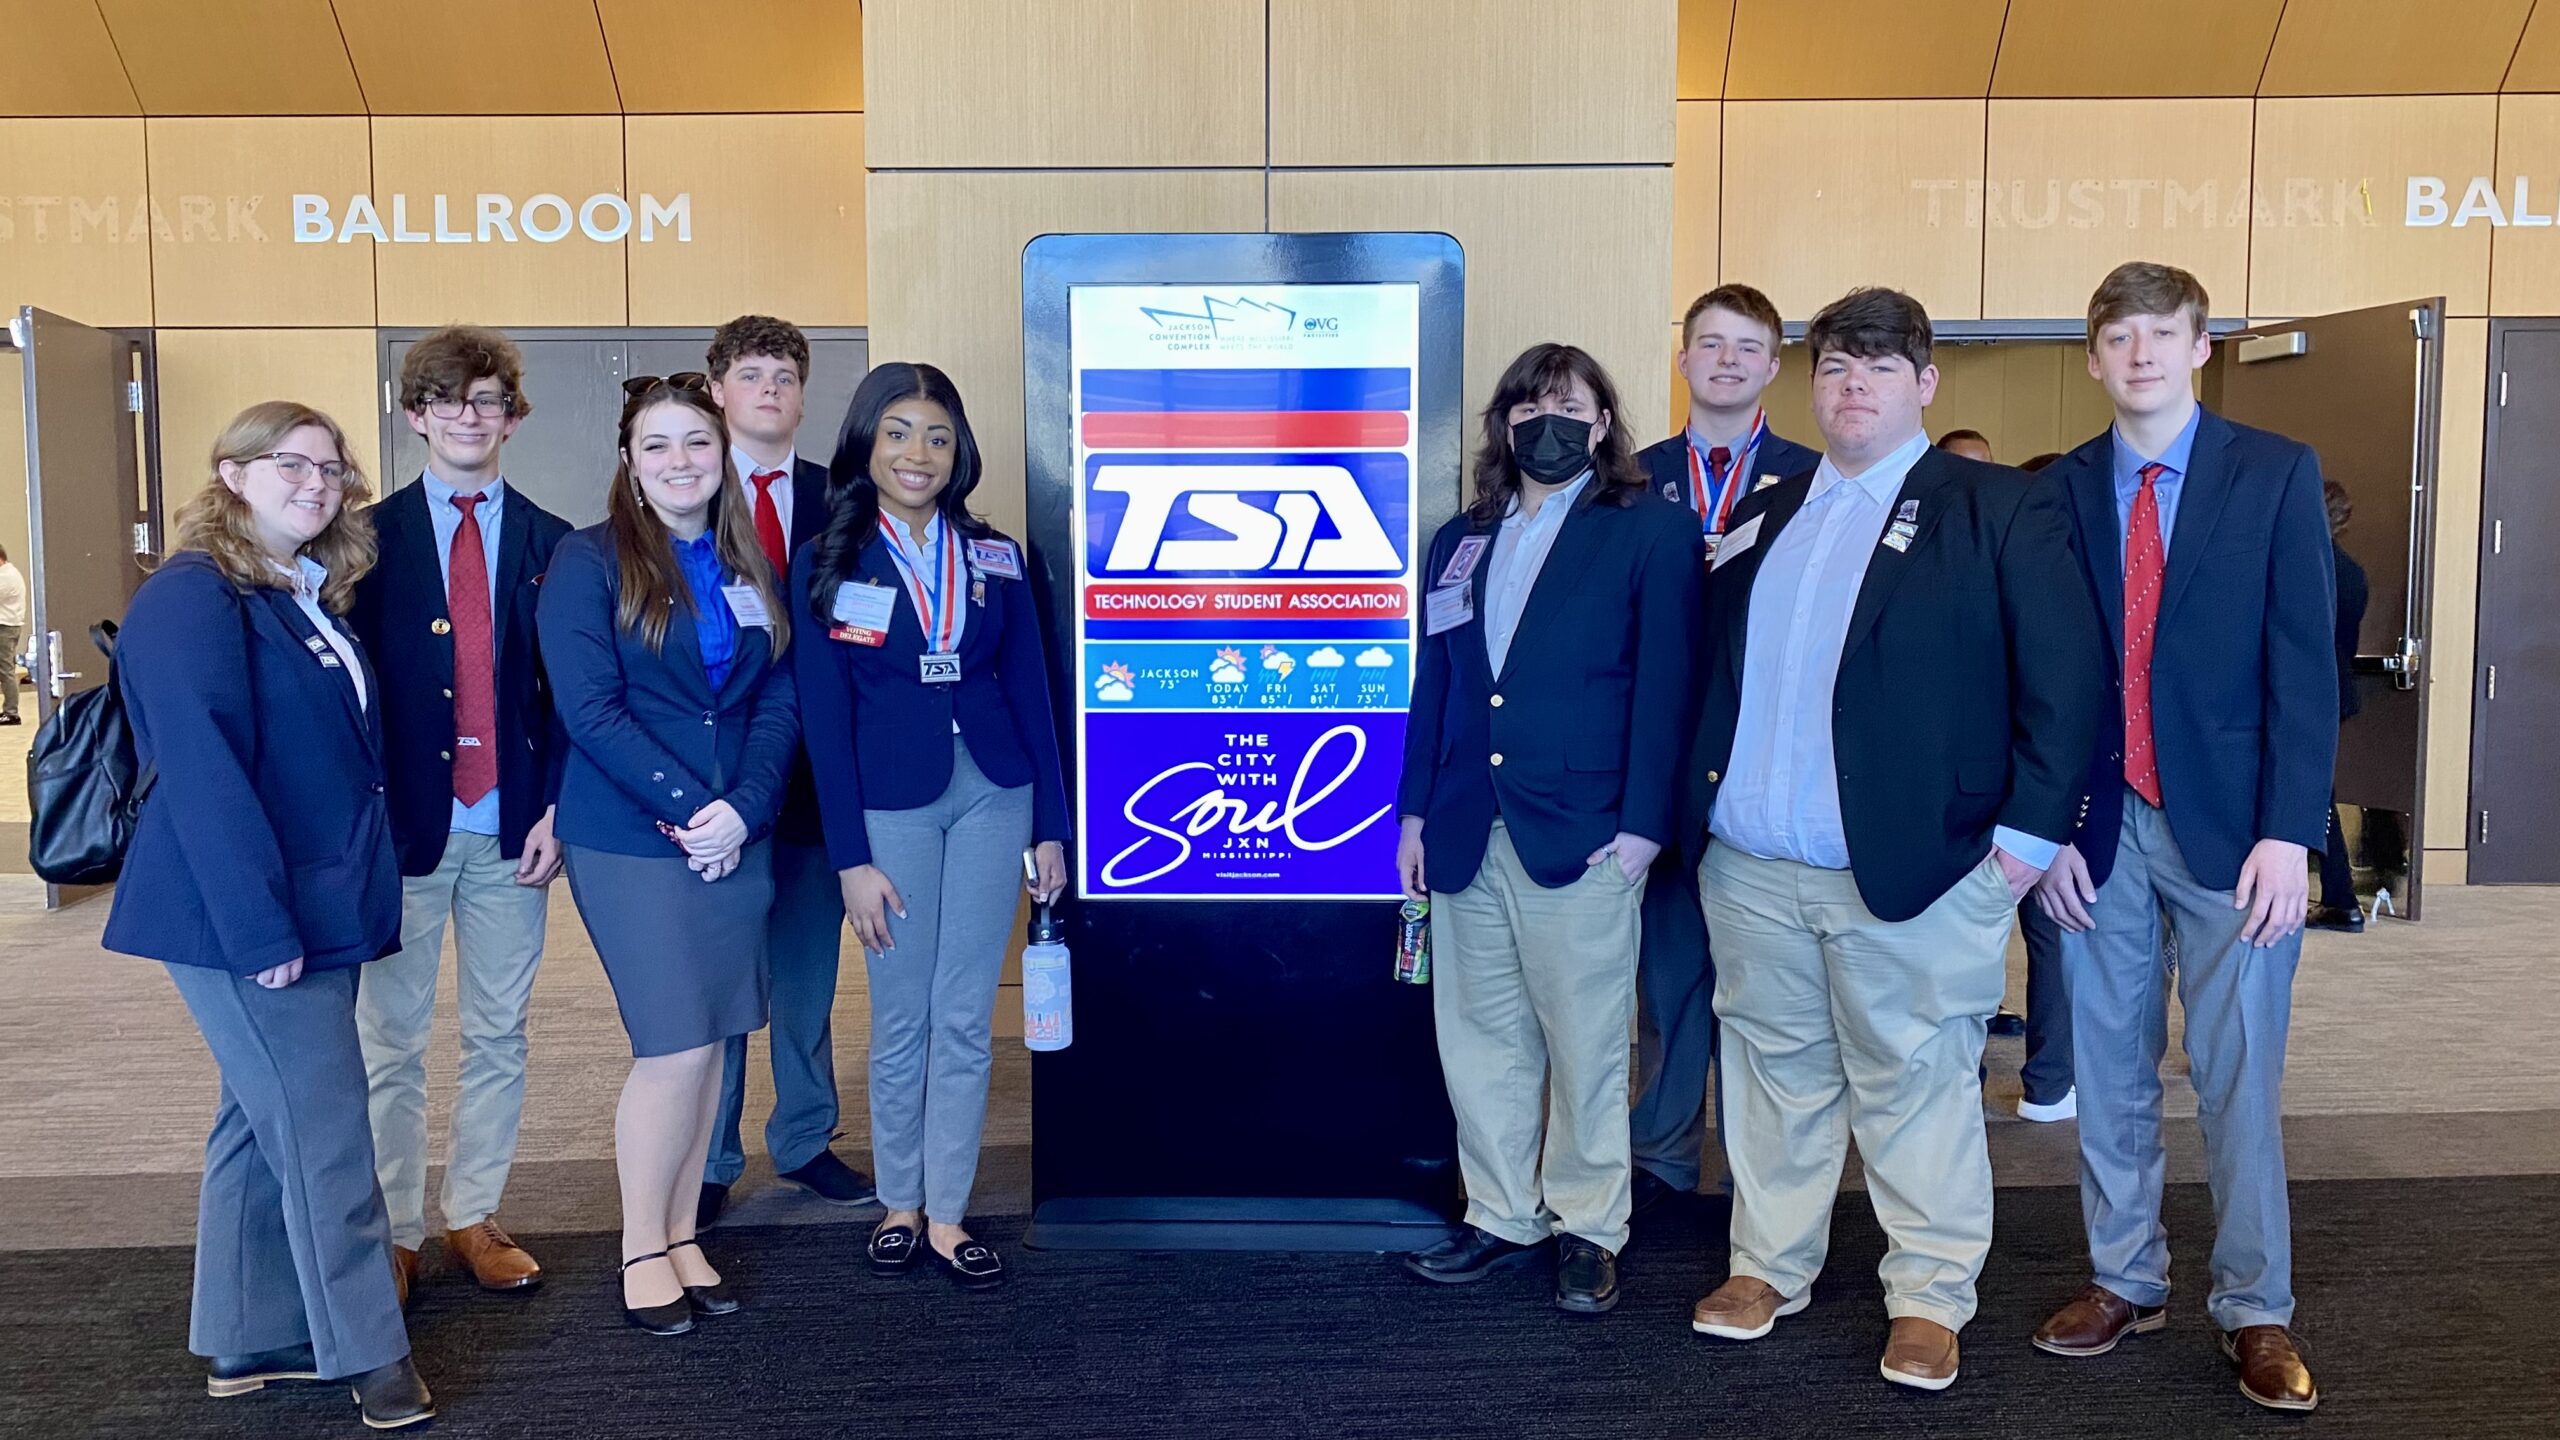 Technology Students of America (TSA) students at New Albany School of Career & Technical Education placed at the TSA State Competition in Jackson on March 21-23: Alea Hudson, 1st place, Extemporaneous Speech; Joshua Germany and Luke Henry, 2nd place, Technical Problem Solving; and Ashlee Stout, Luke Henry, Cass Vanstory, Jon Bennett, Dylan Bristow, and Anderson Crews, 4th place, On Demand Video.  Pictured (l-r):  Ashlee Stout, Jon Bennett, Alex Robertson, Joshua Germany, Alea Hudson, Cass Vanstory, Luke Henry, Dylan Bristow and Anderson Crews. TSA advisors are Jalon Bullock, Chris Russell and Latrina Walker. 